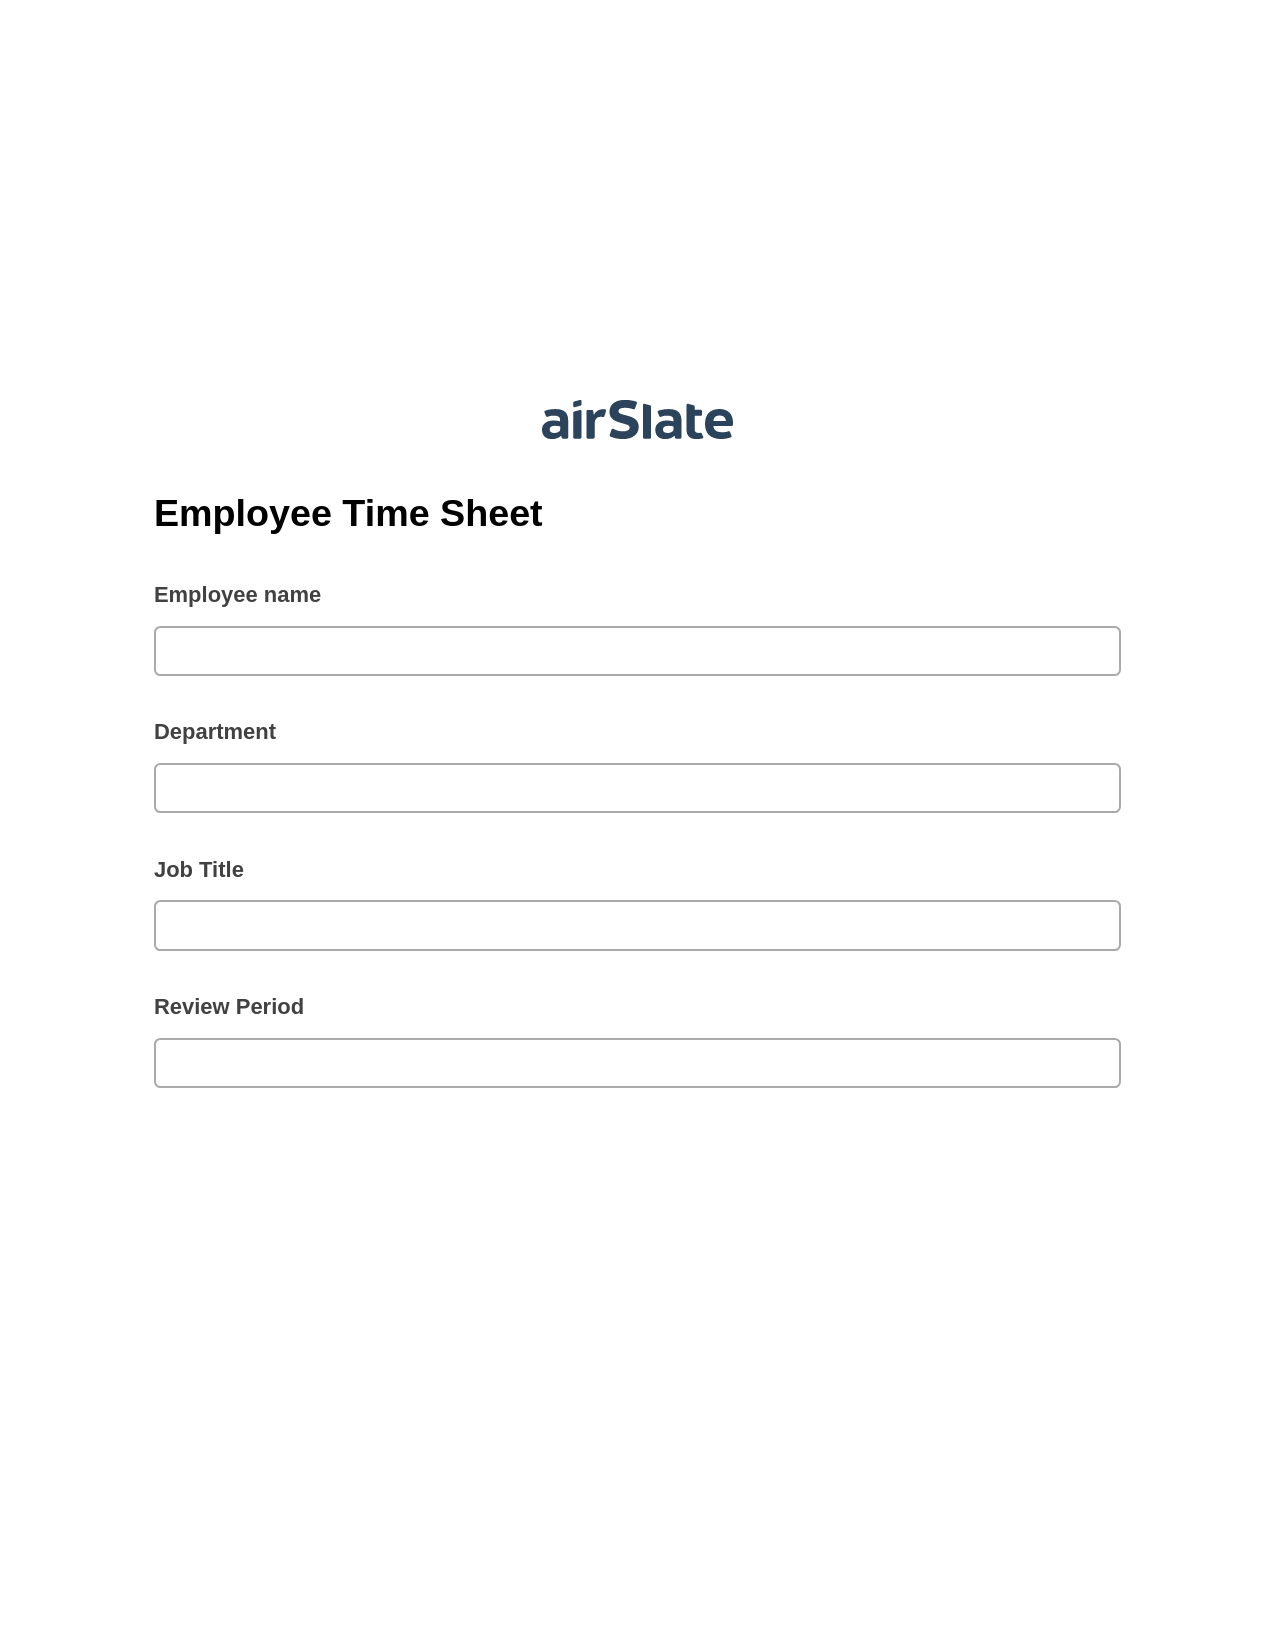 Employee Time Sheet Pre-fill from CSV File Bot, Update Audit Trail Bot, Archive to SharePoint Folder Bot